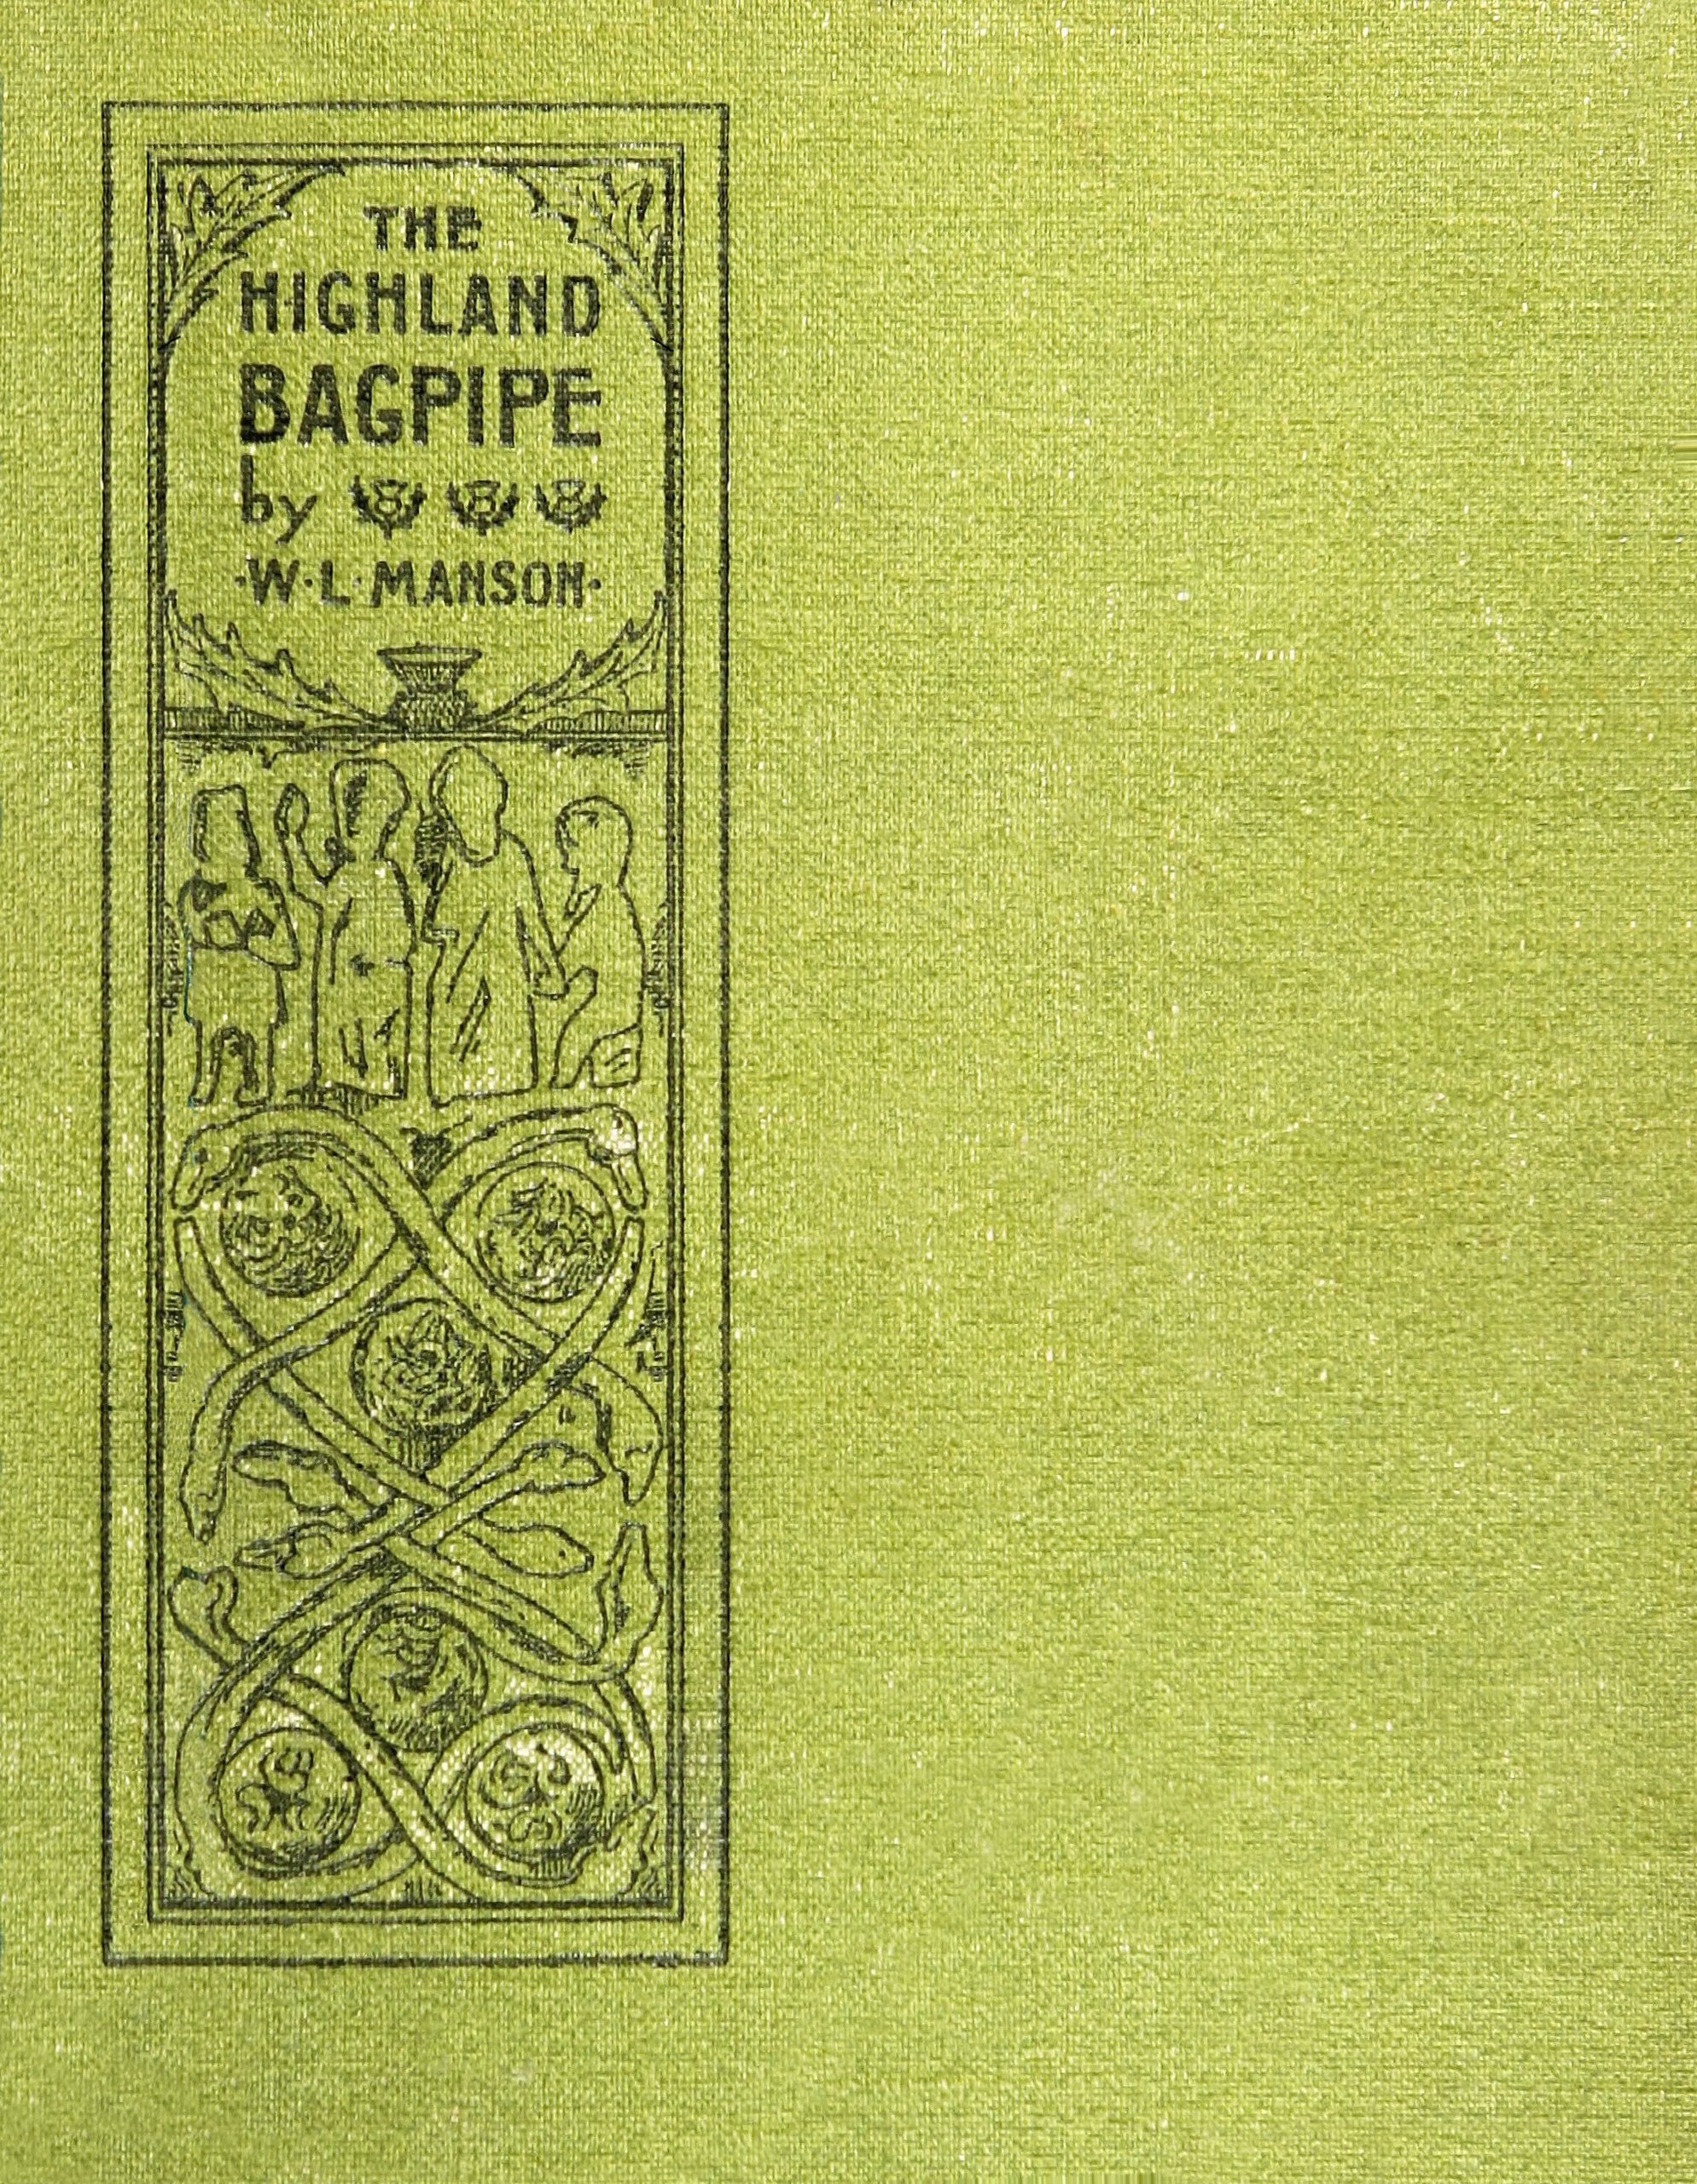 The Highland bagpipe